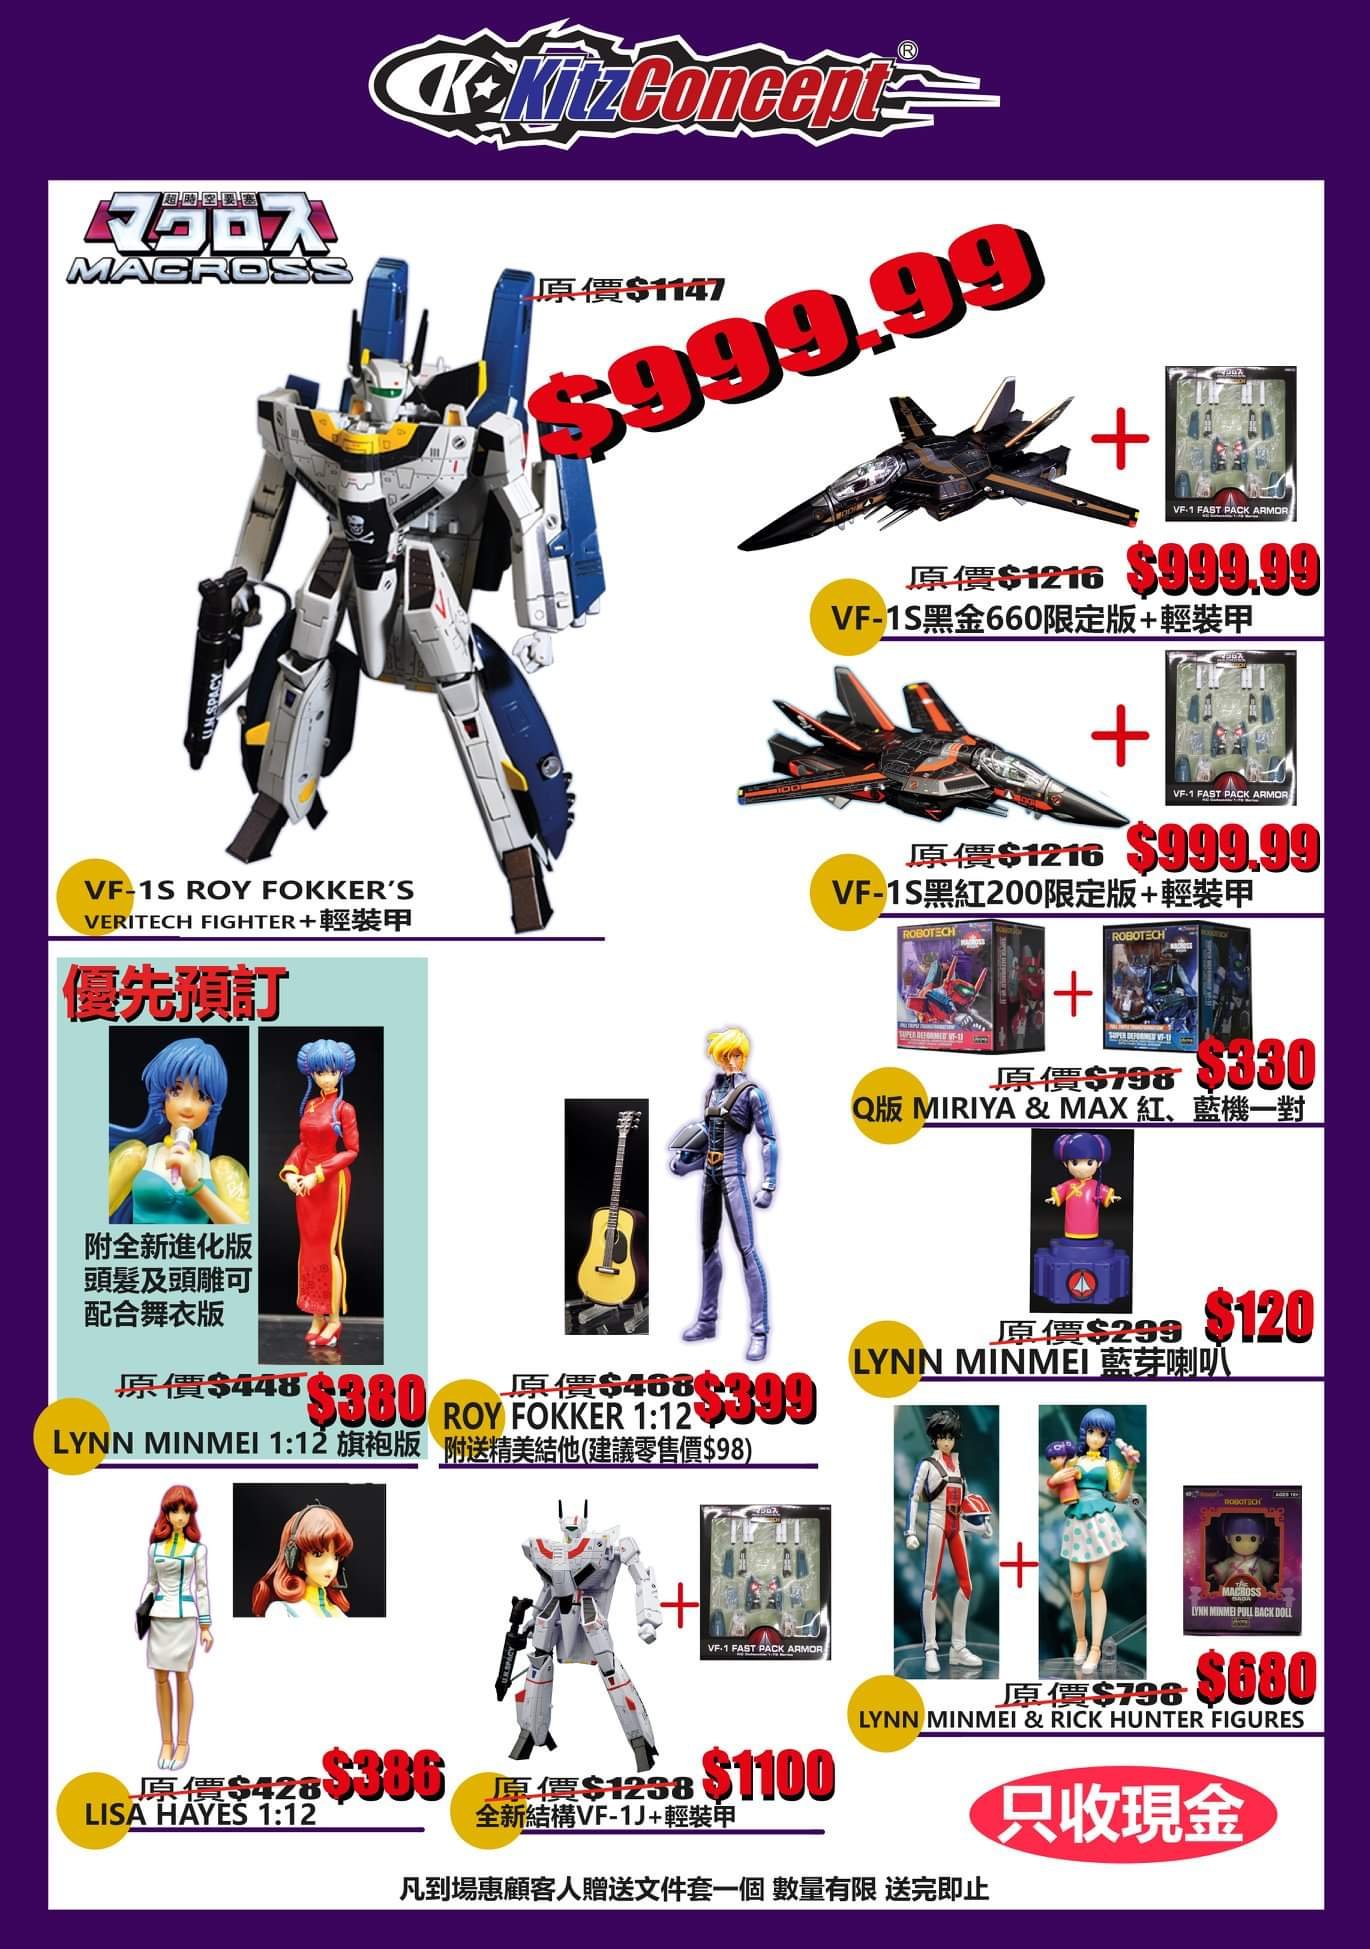 Kitz Concept Robotech Toy Line - Page 43 - Anime or 